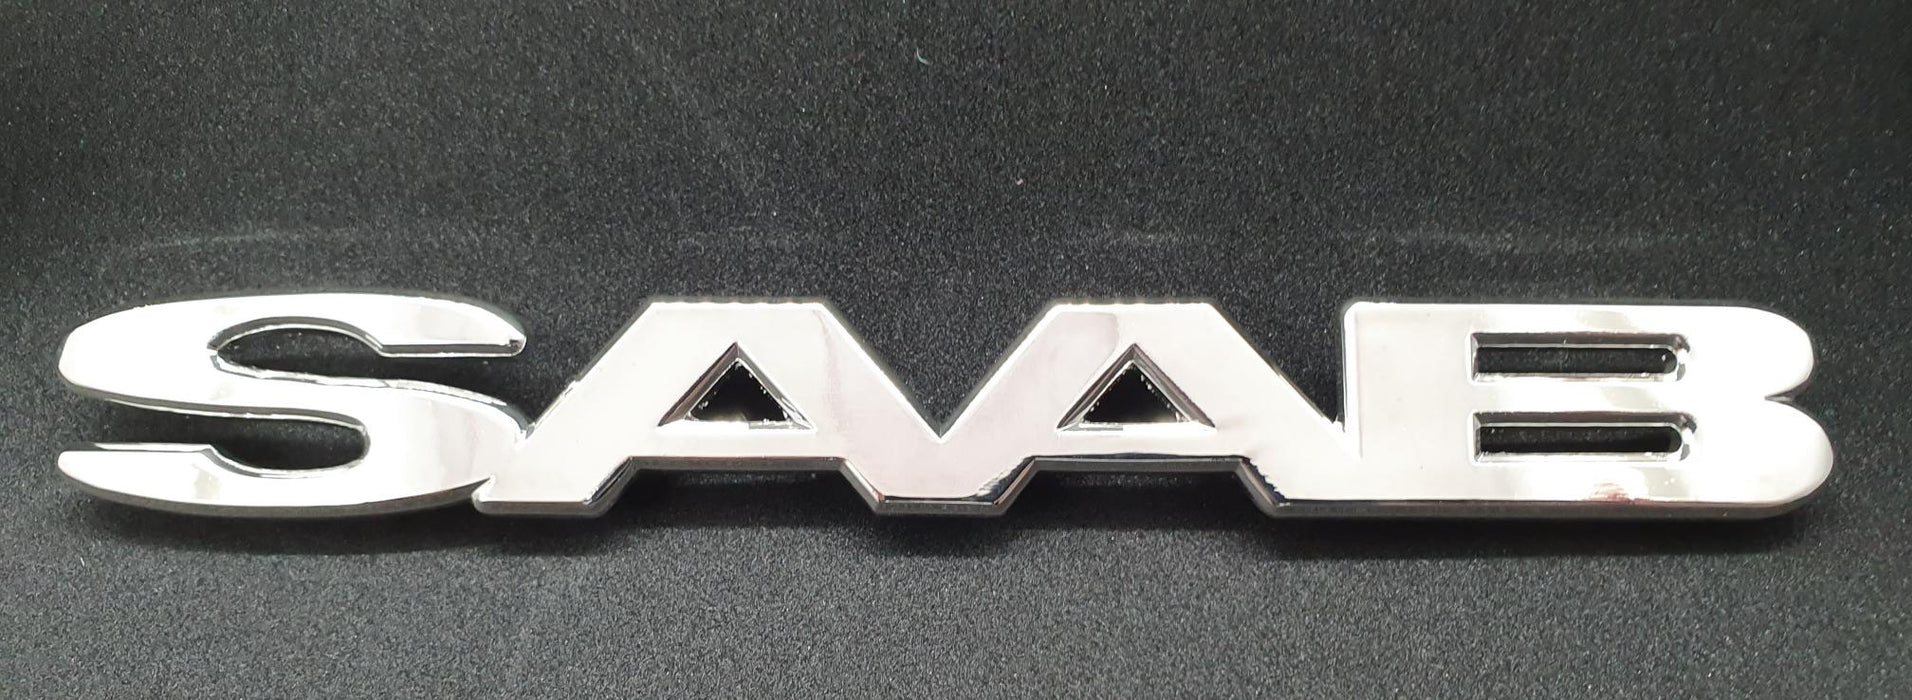 Saab 96/95 wing badge.  Injection alloy  chrome plated